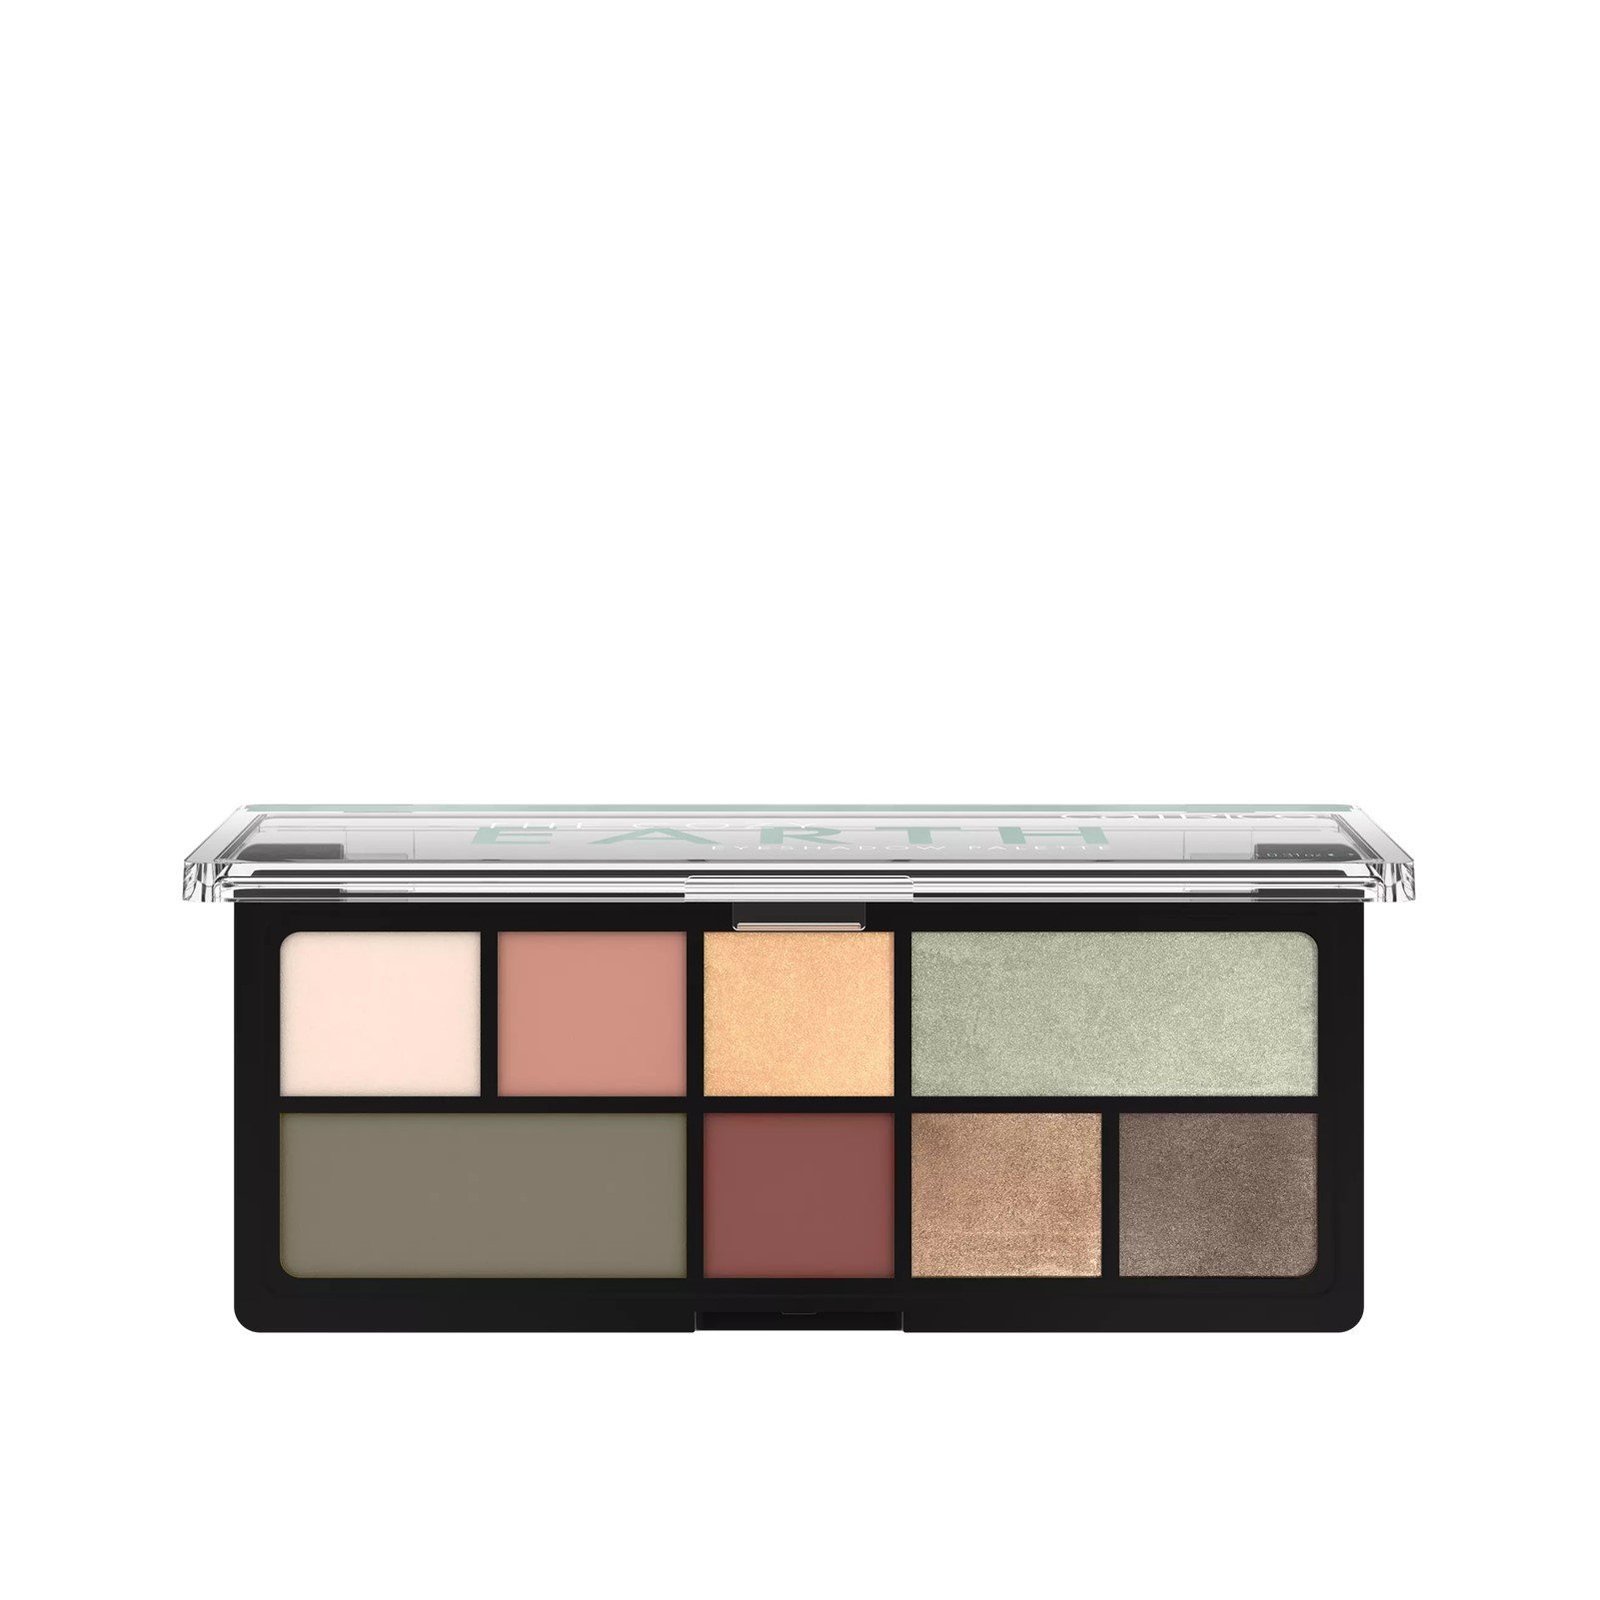 Catrice The Cozy Earth Eyeshadow Palette (0.31 oz)